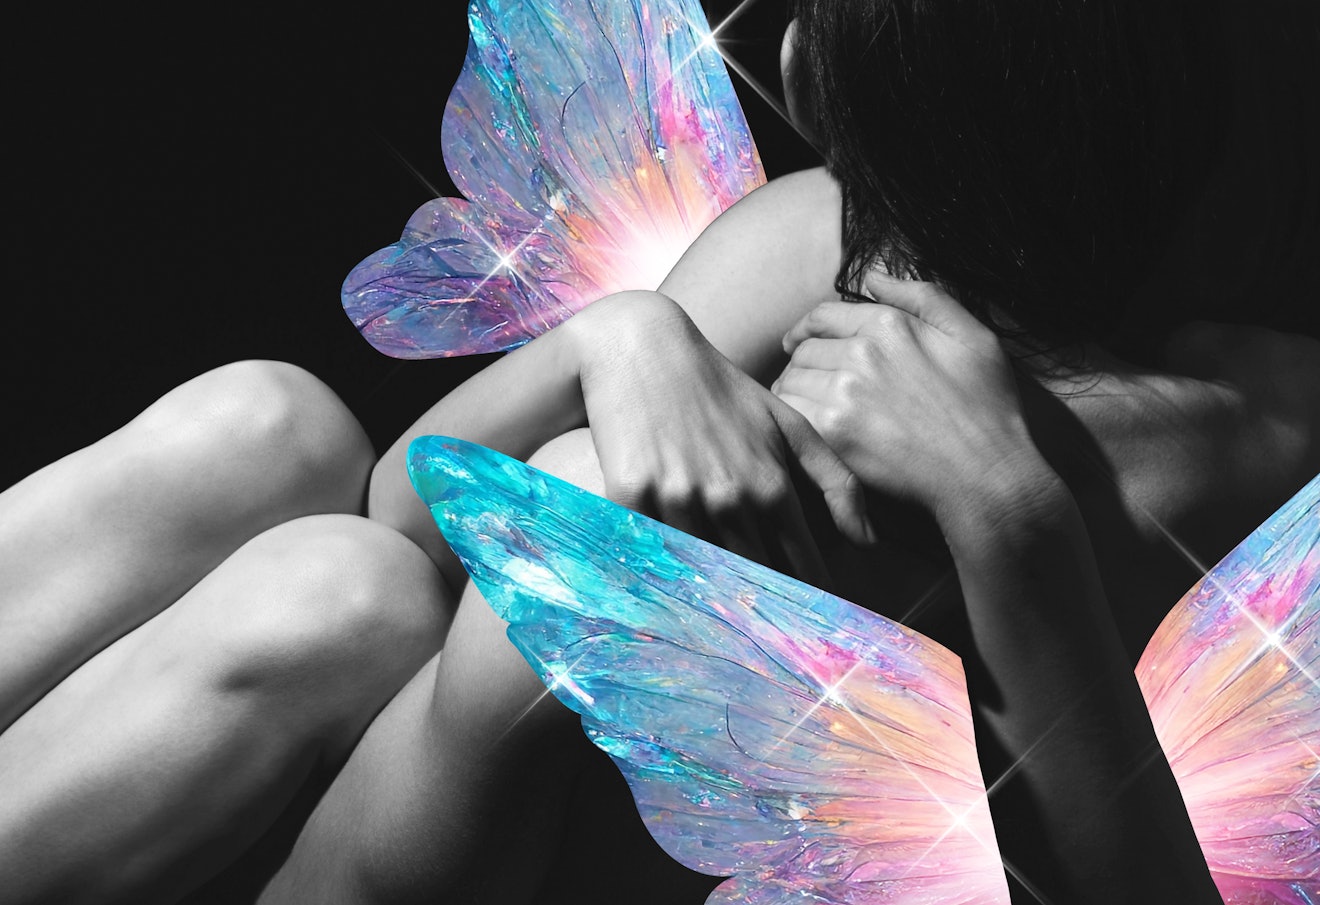 A photo collage featuring two people embracing, alongside a pair of fairy wings.